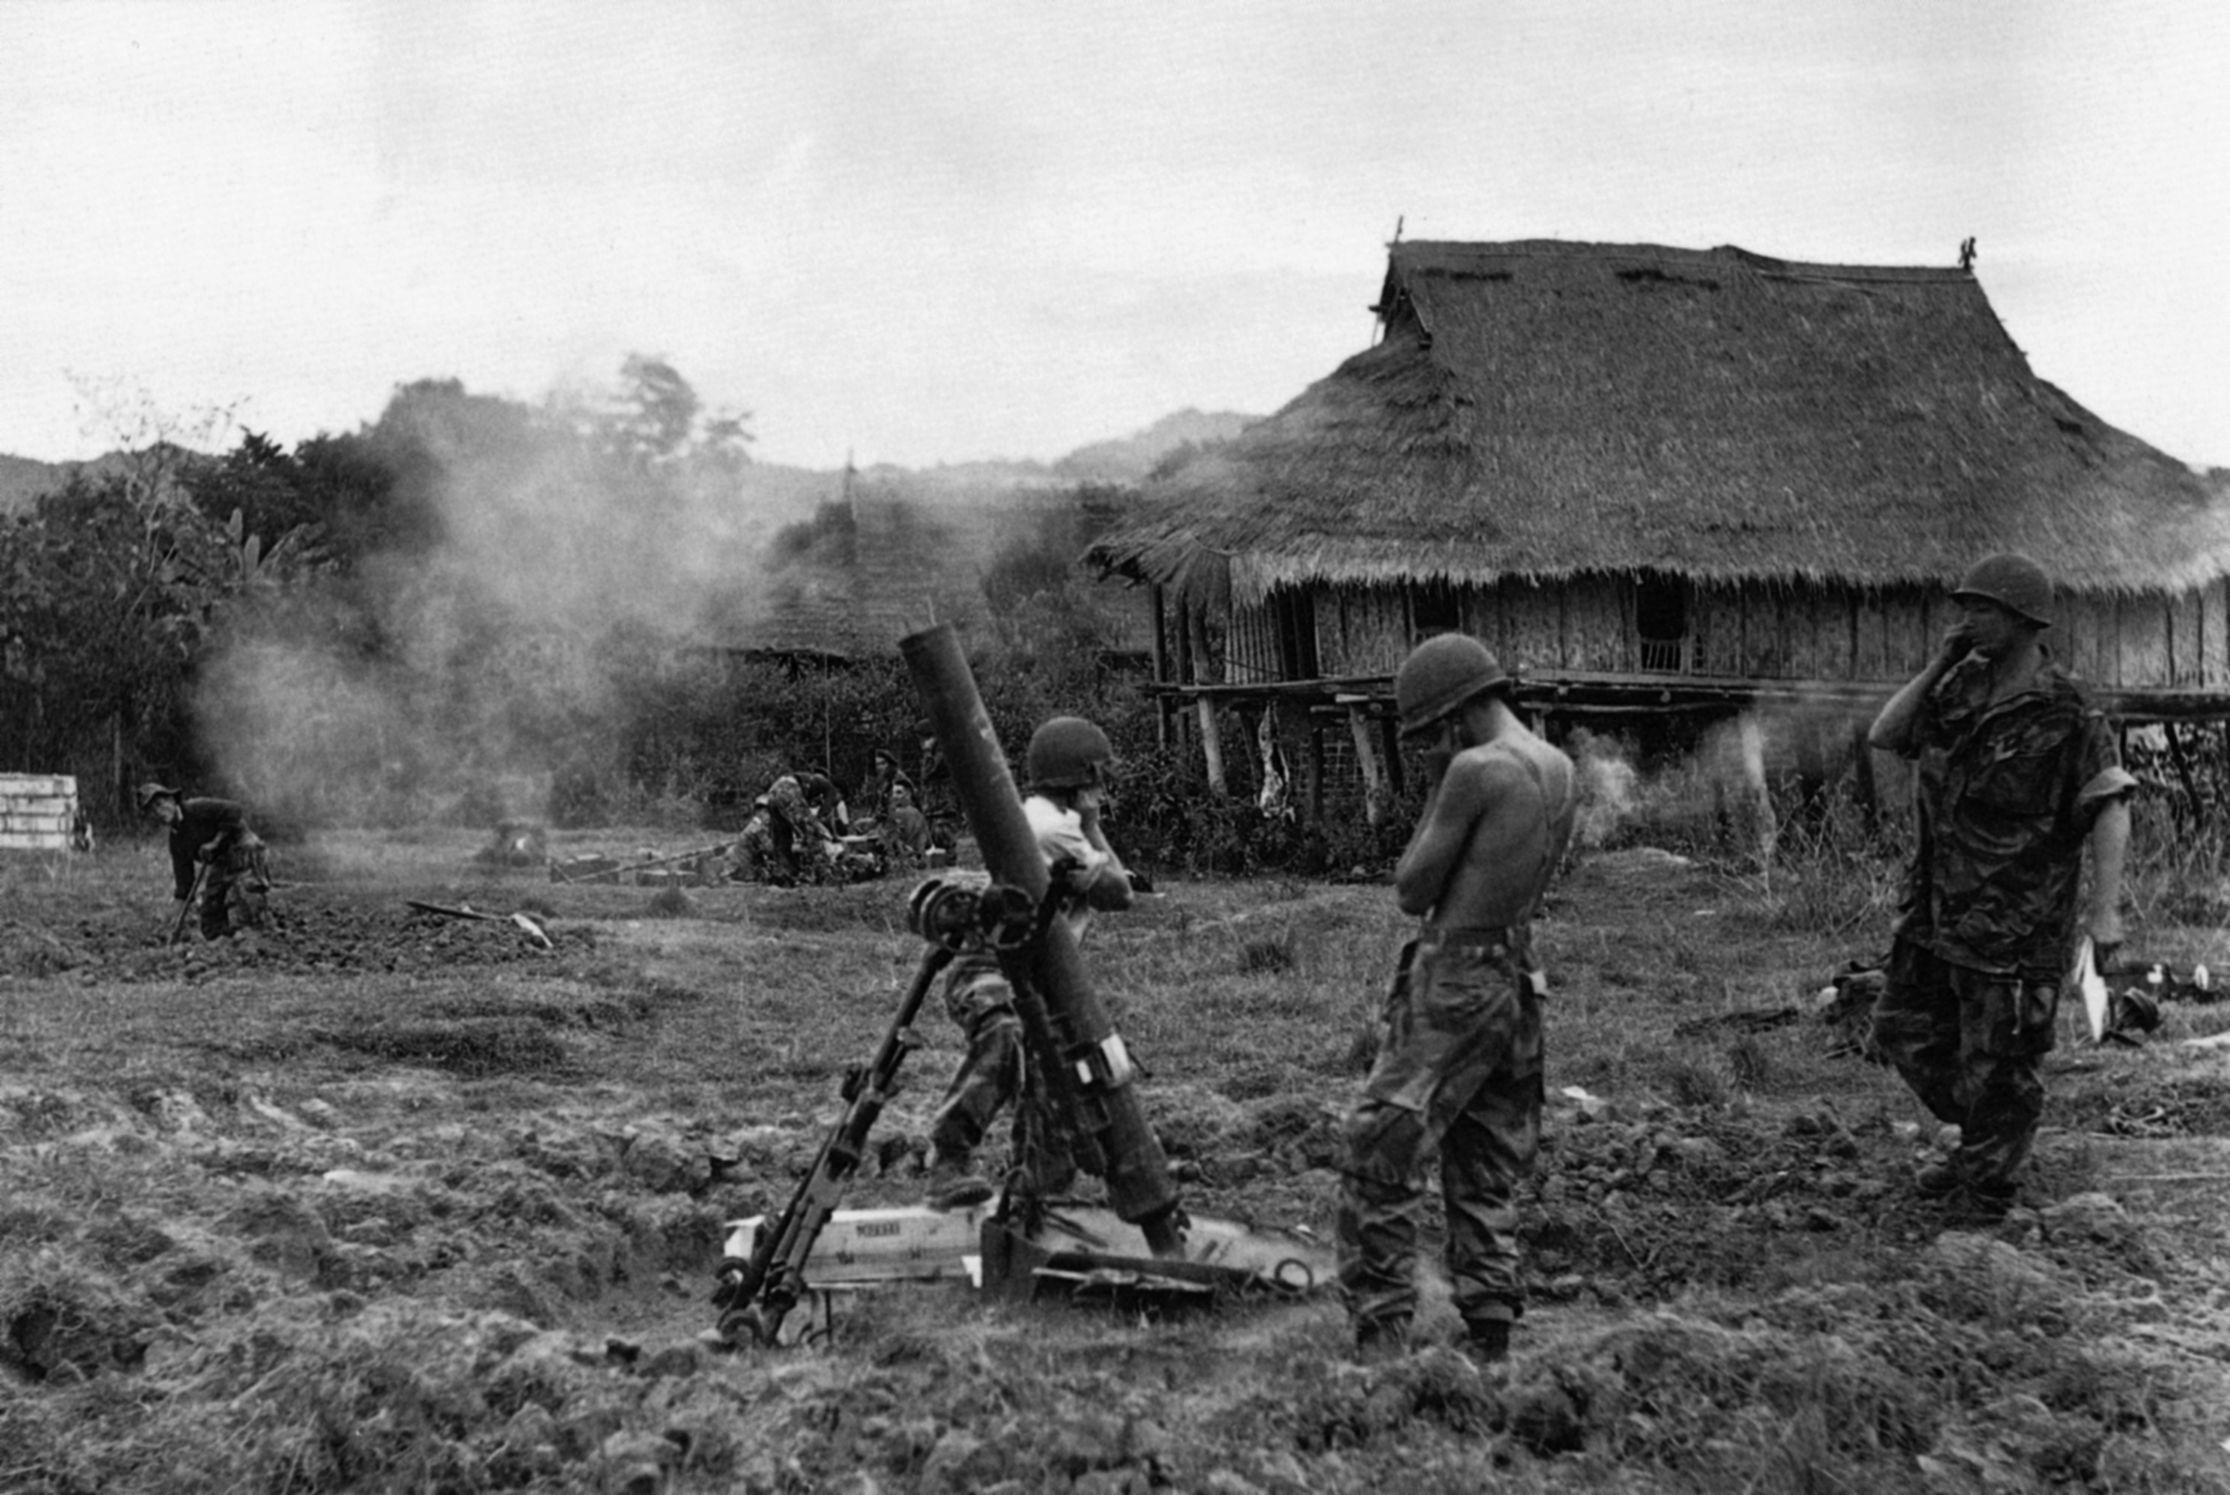 A 4.7-inch mortar line in action during Operation Castor. Huts in the background were torn down to clear fields of fire and build defenses. 